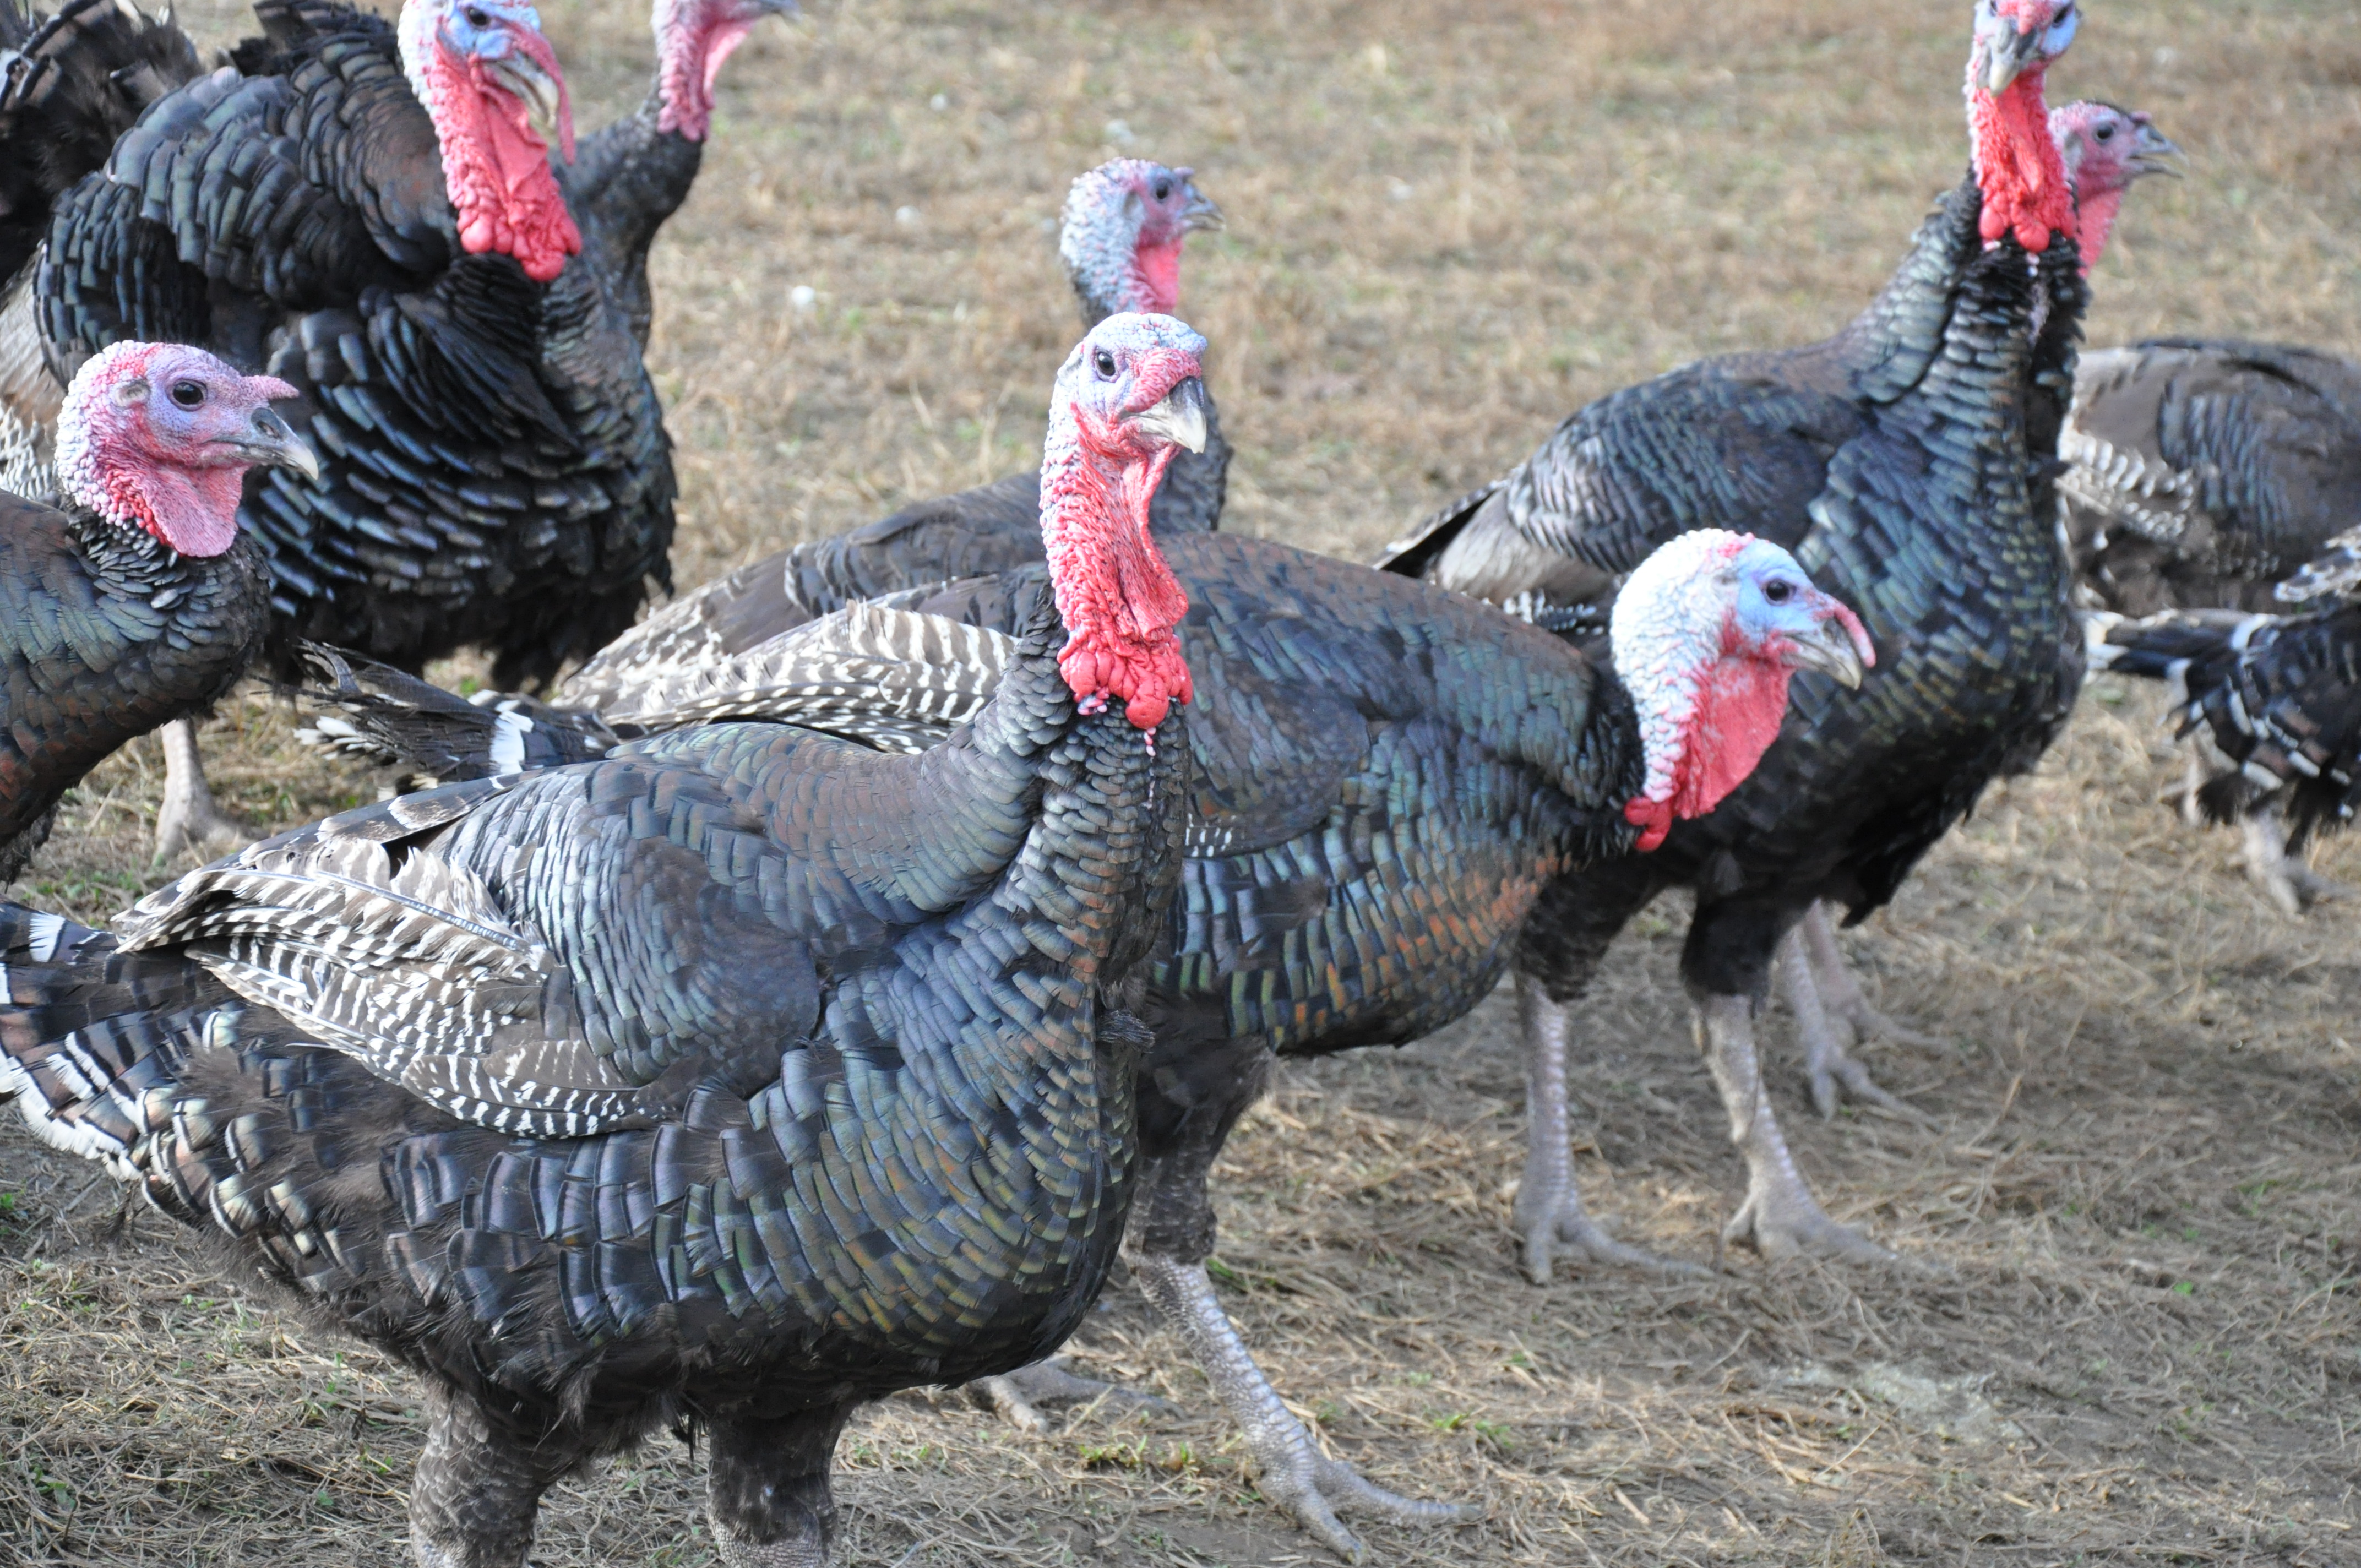 For area turkey farmer, it’s the busiest time of year (Video)